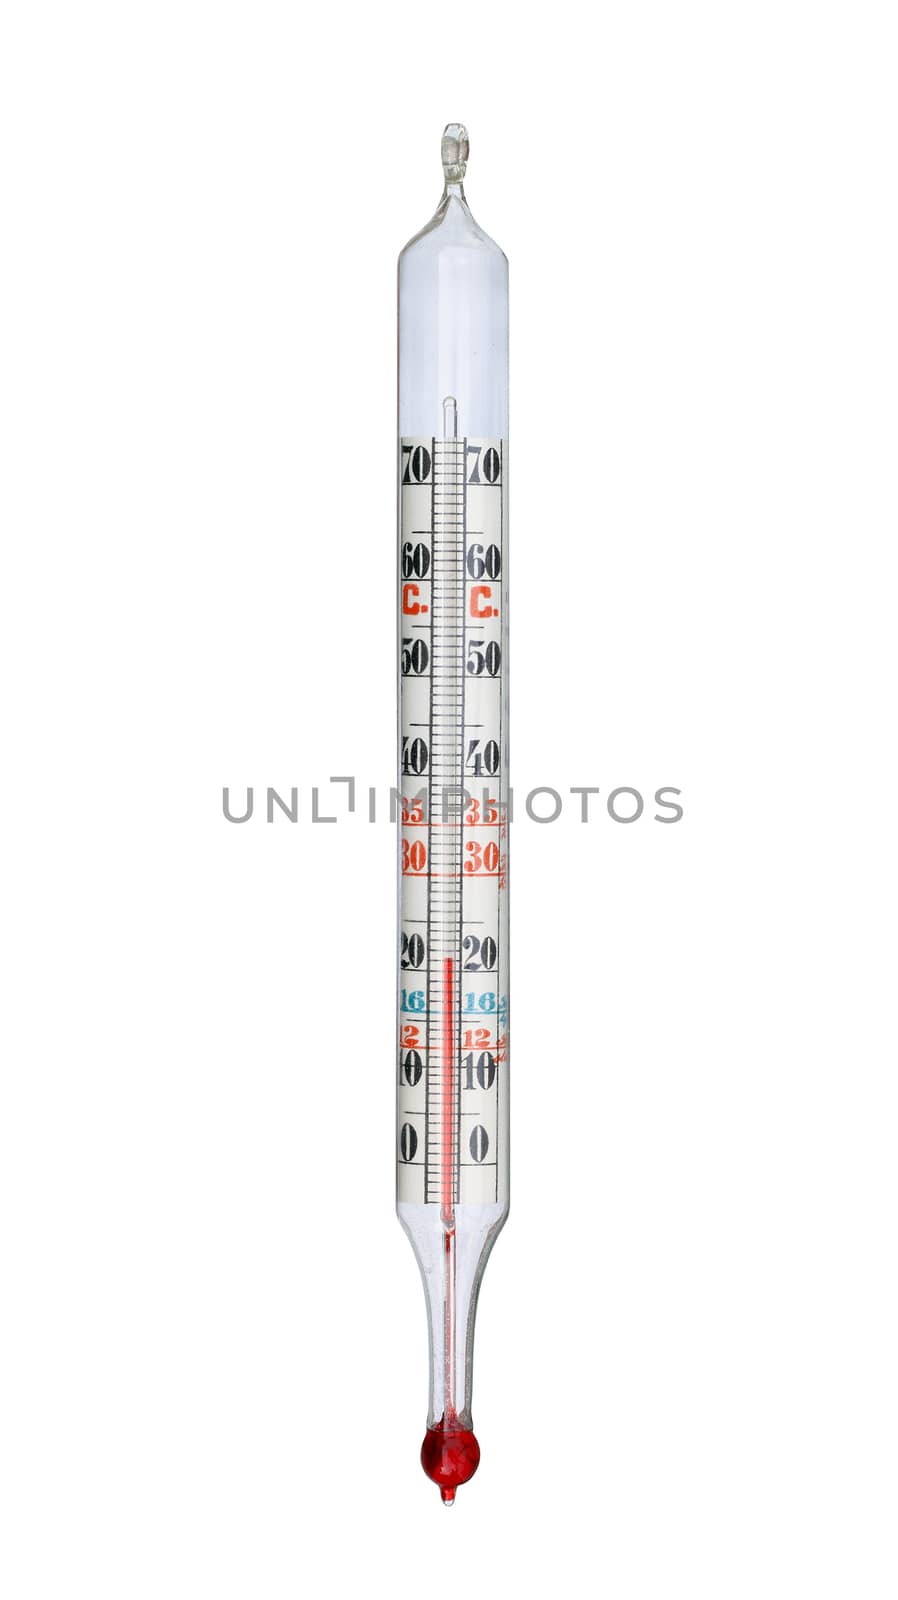 Detail of the old mercury glass thermometer on white background